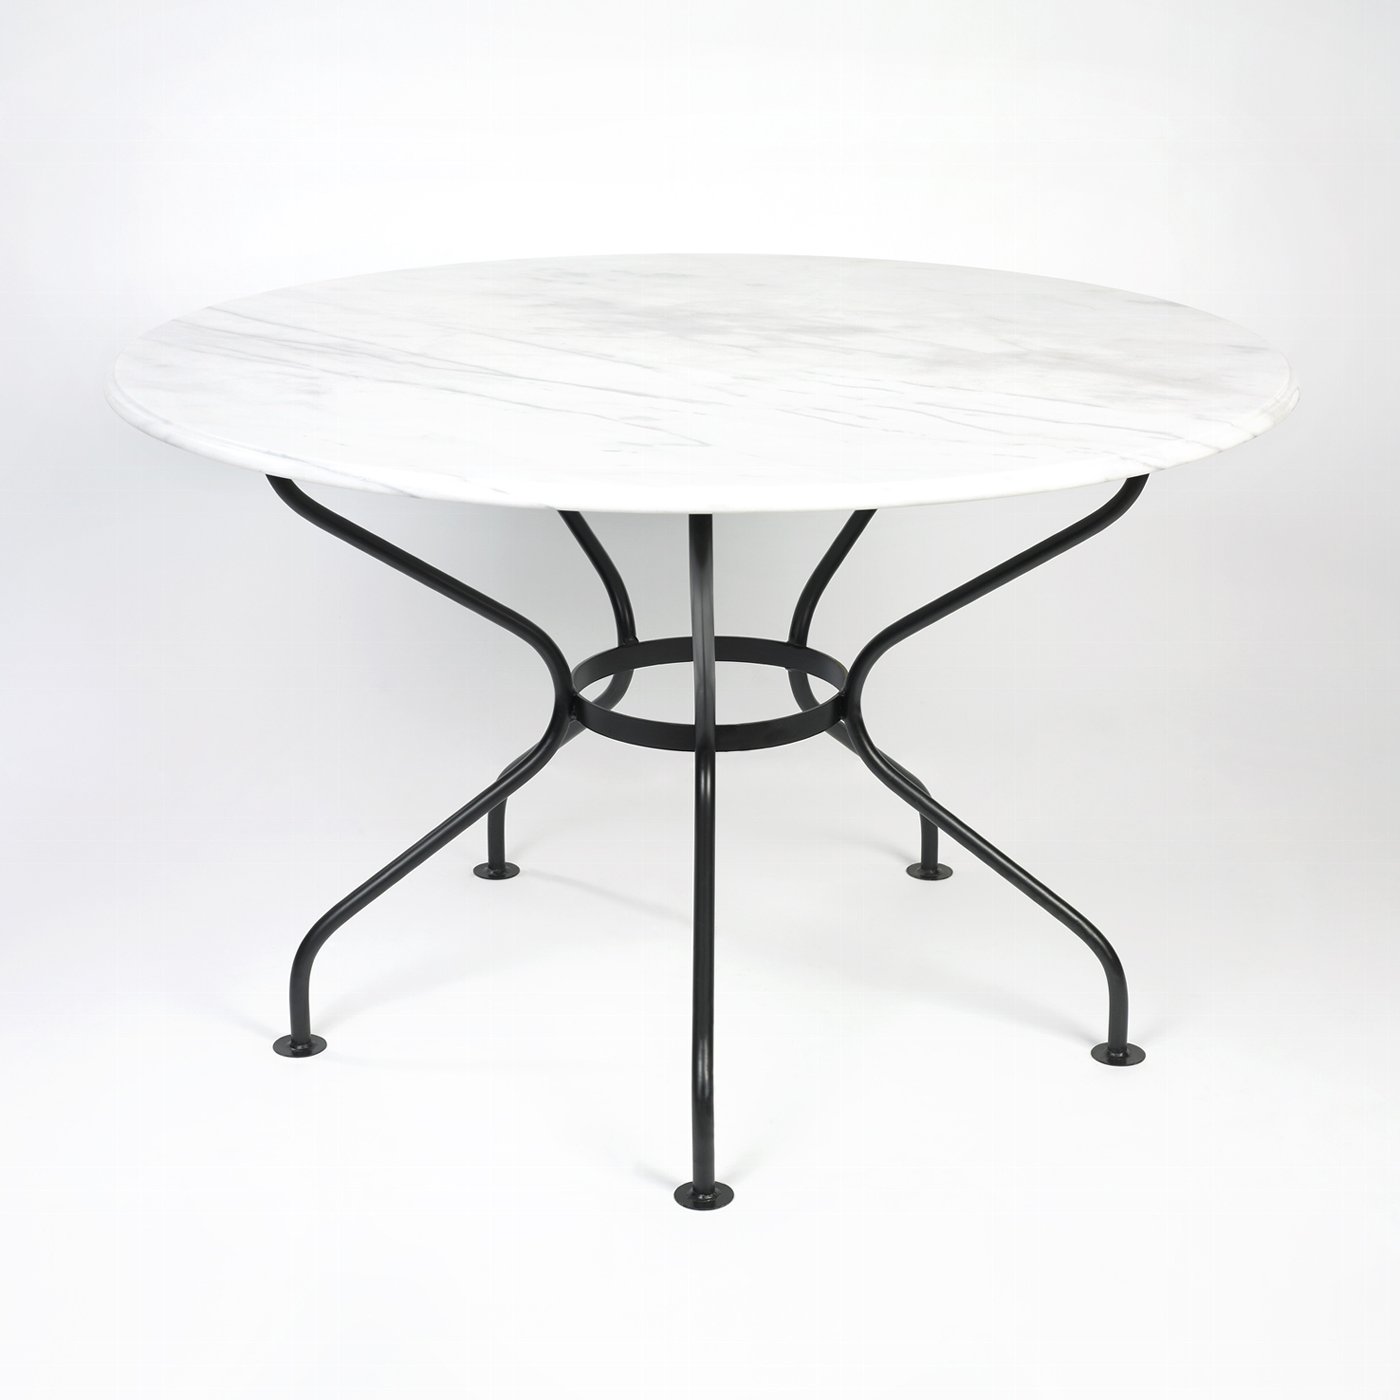 Provence table, top marble white - H76 D 125 cm